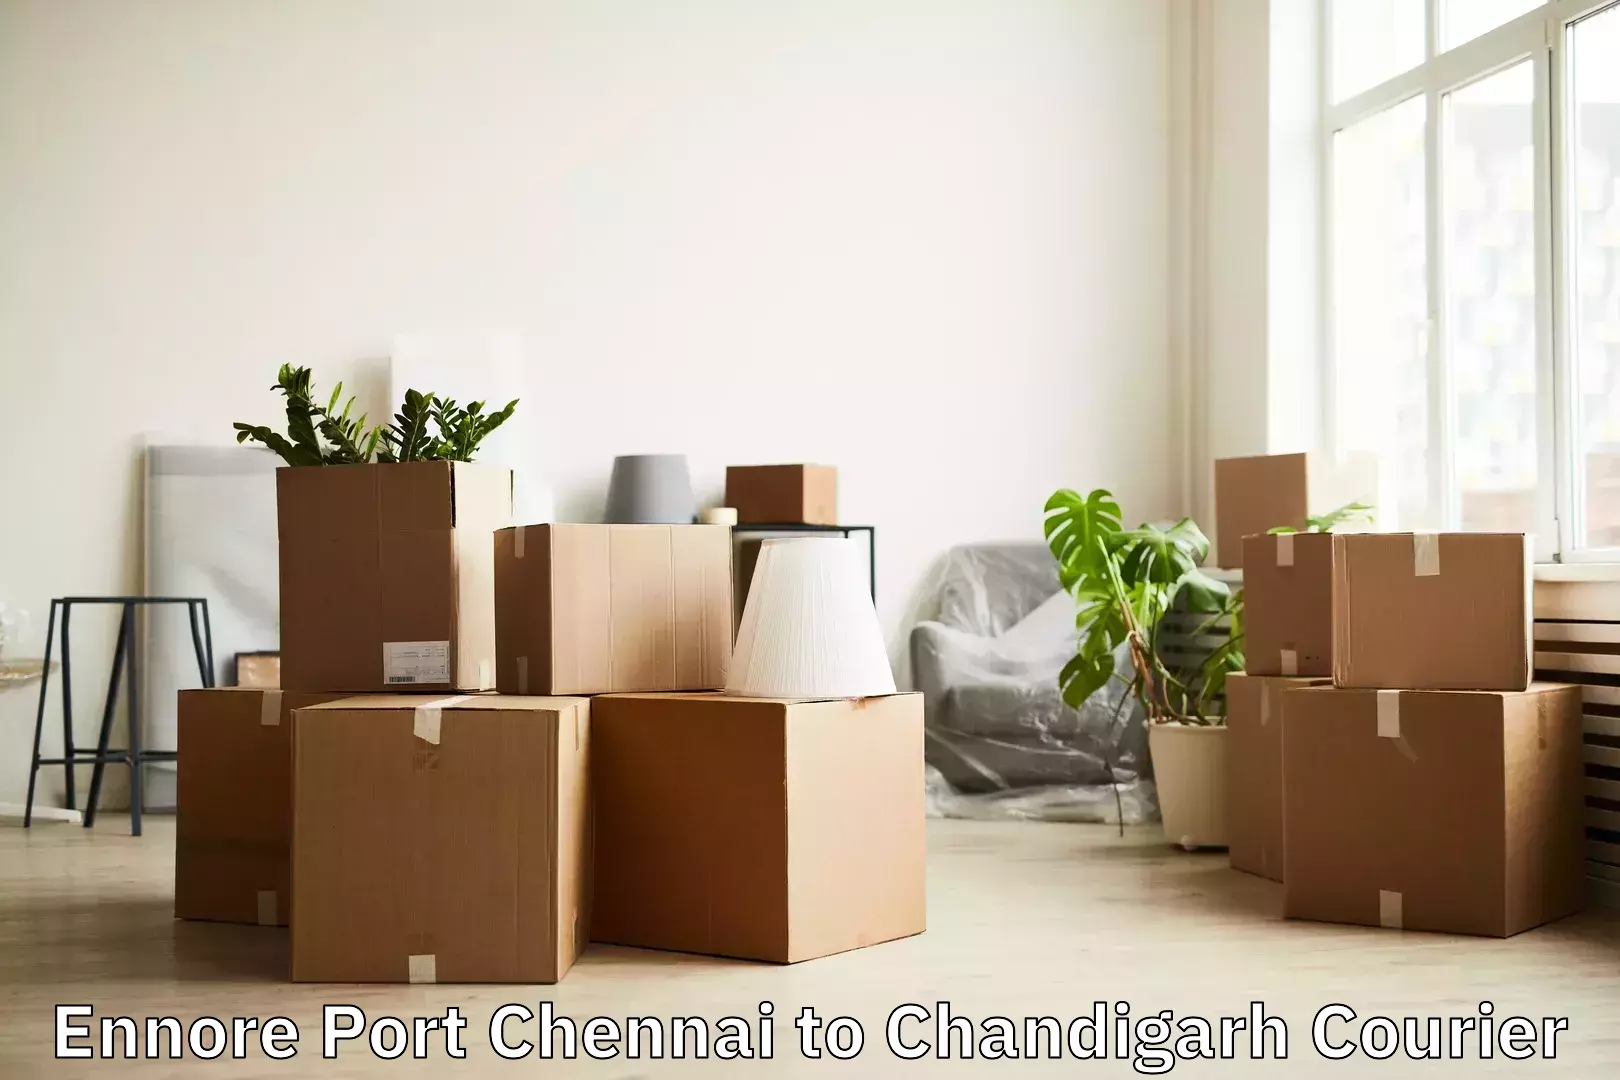 Luggage transport consulting Ennore Port Chennai to Chandigarh